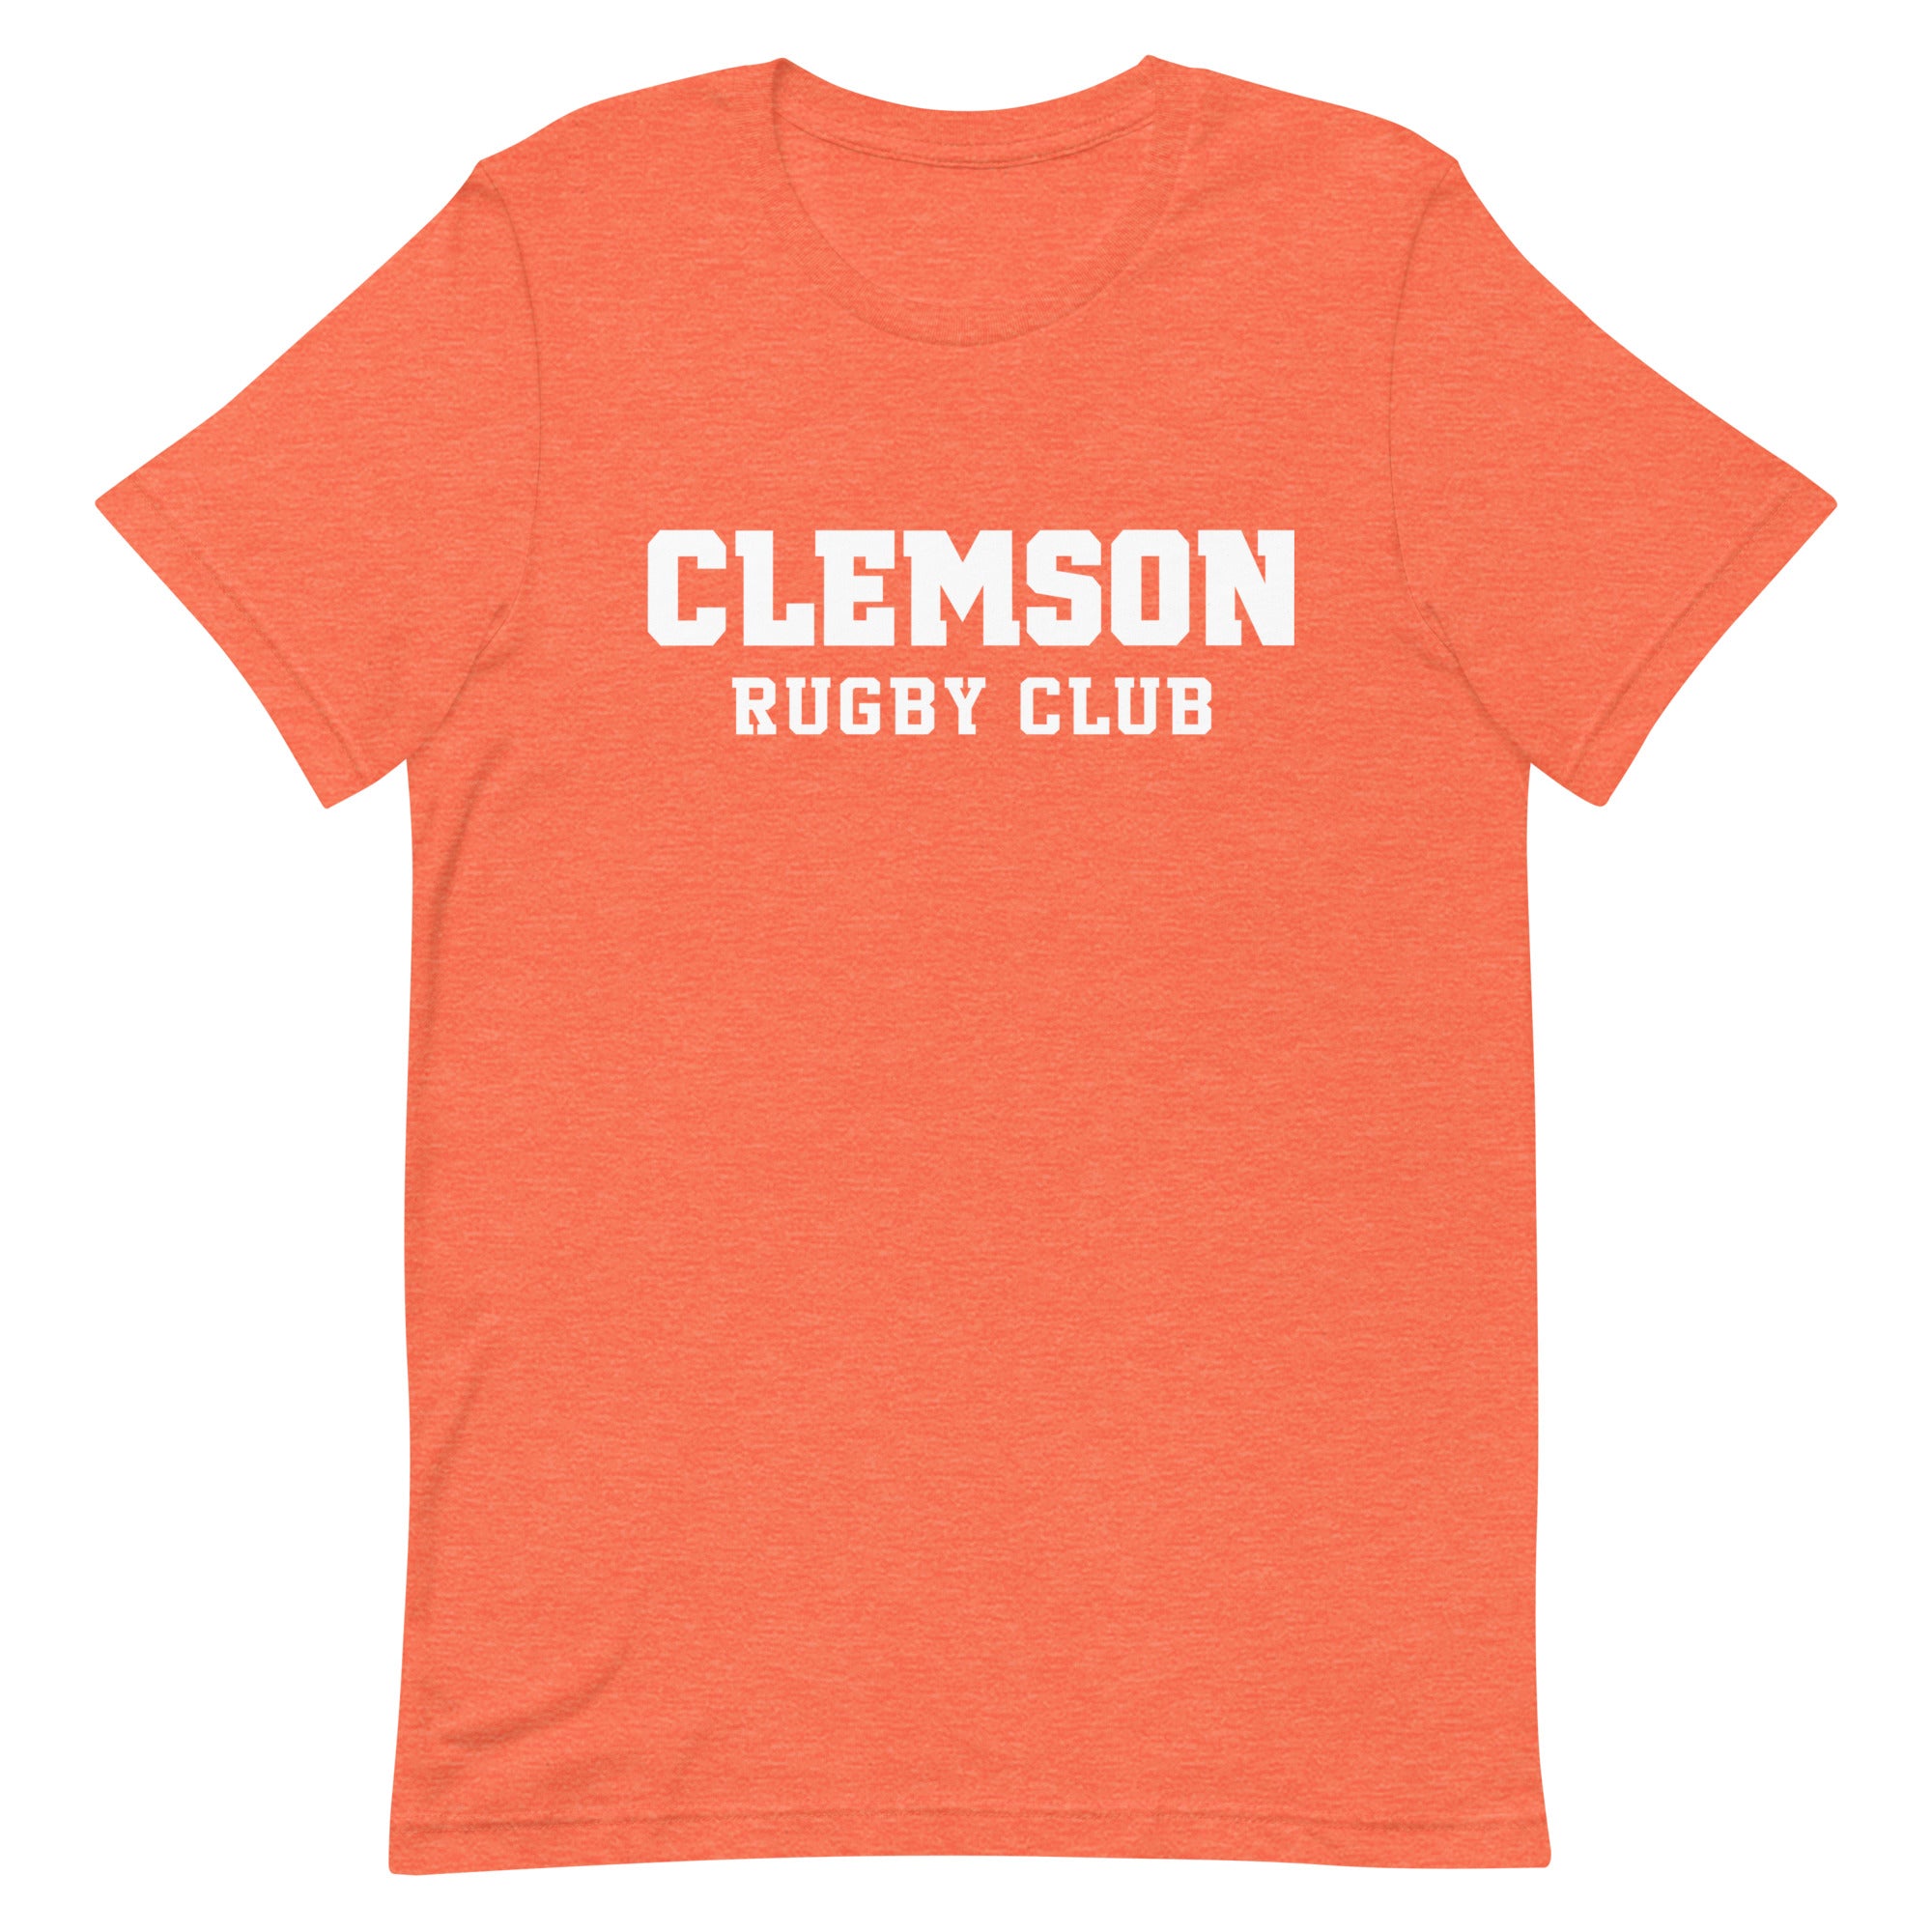 Rugby Imports Clemson Rugby Club Alternate Social T-Shirt